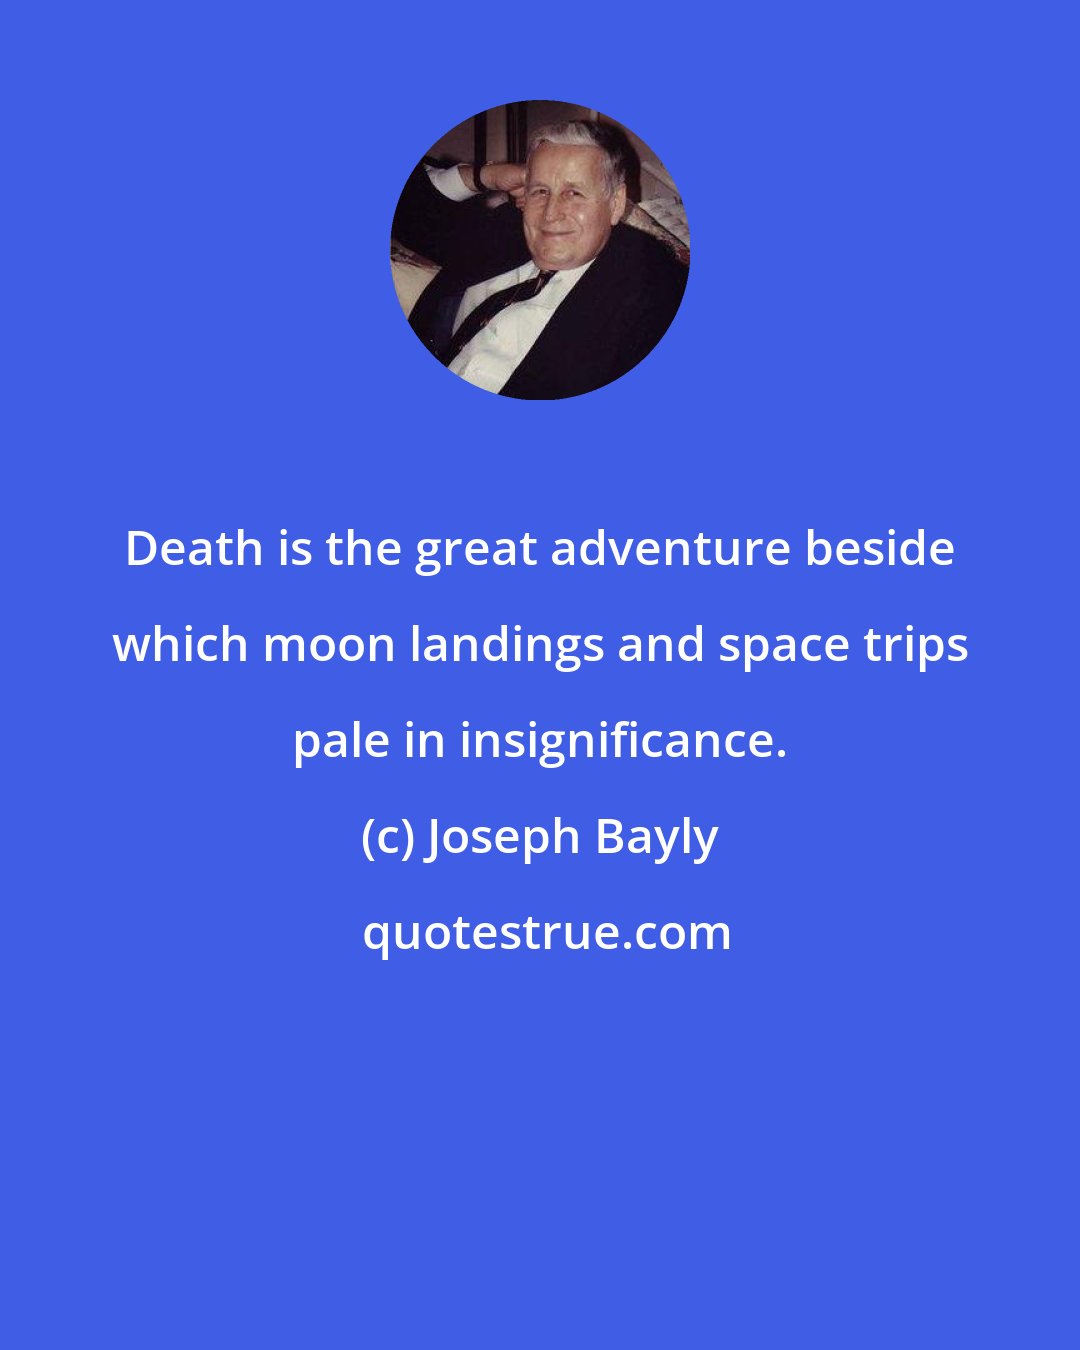 Joseph Bayly: Death is the great adventure beside which moon landings and space trips pale in insignificance.